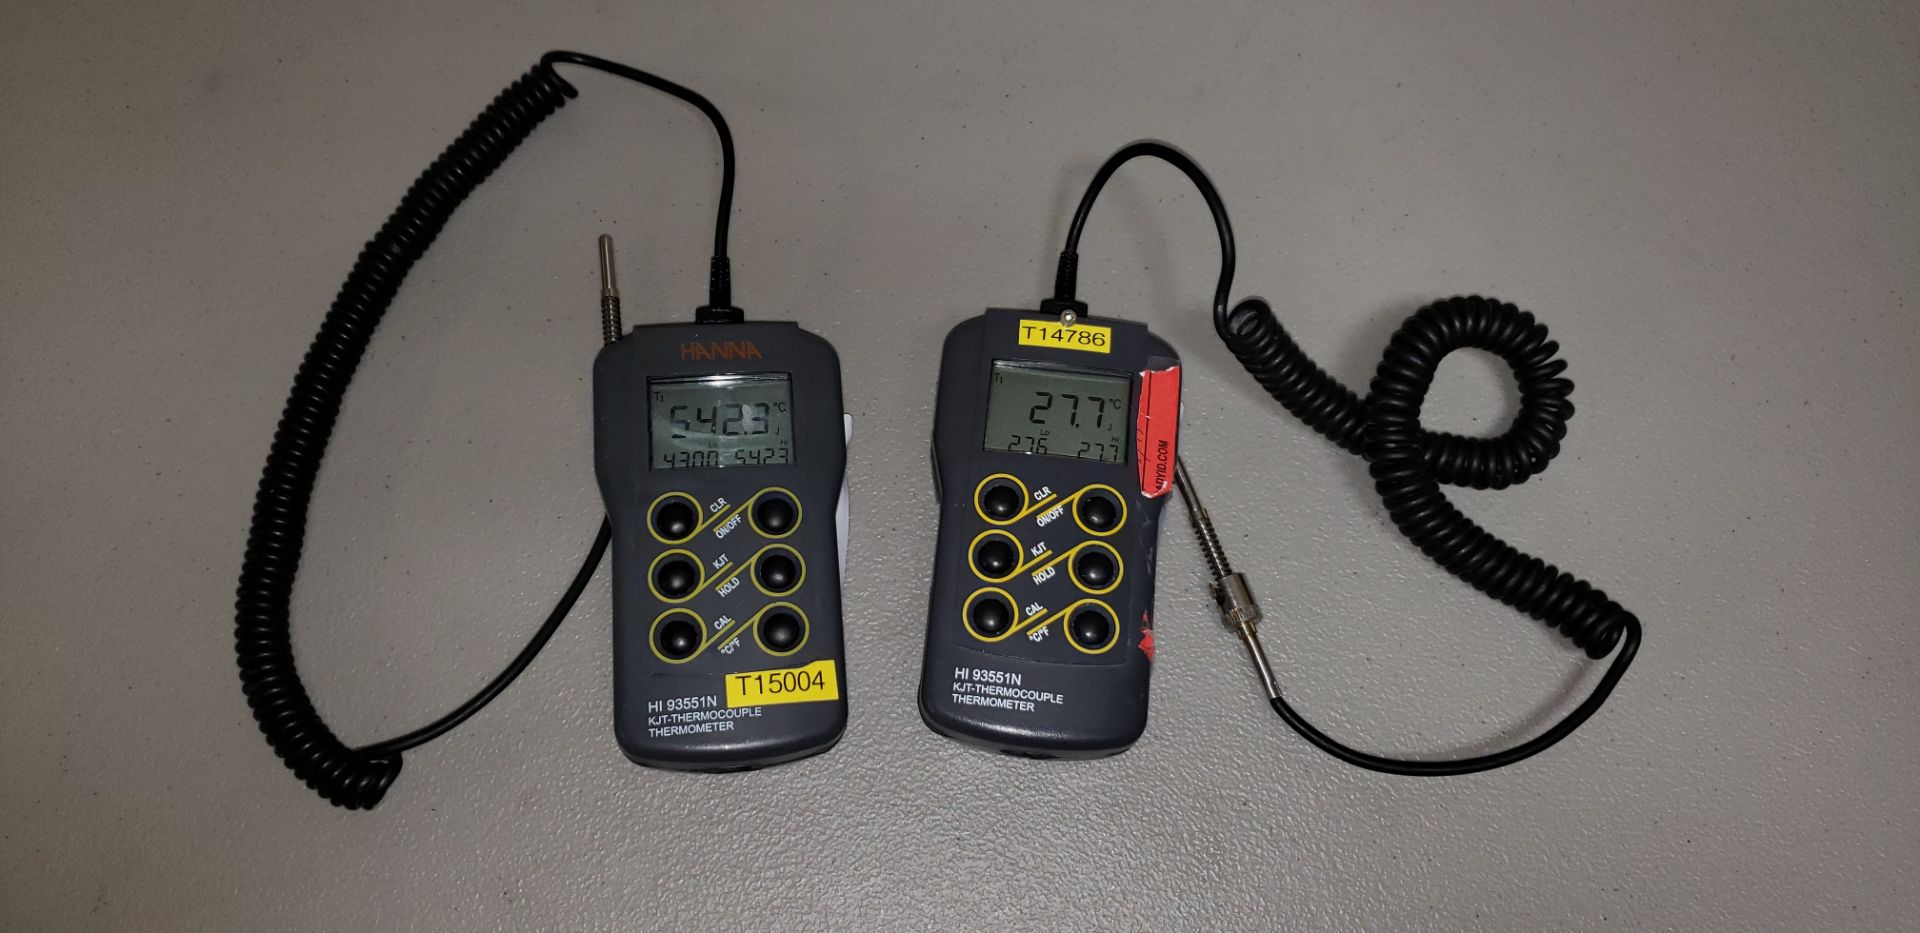 (2) Hanna Instruments HI 93551N KJT Single Channel ThermoCouple Thermometer with Probes